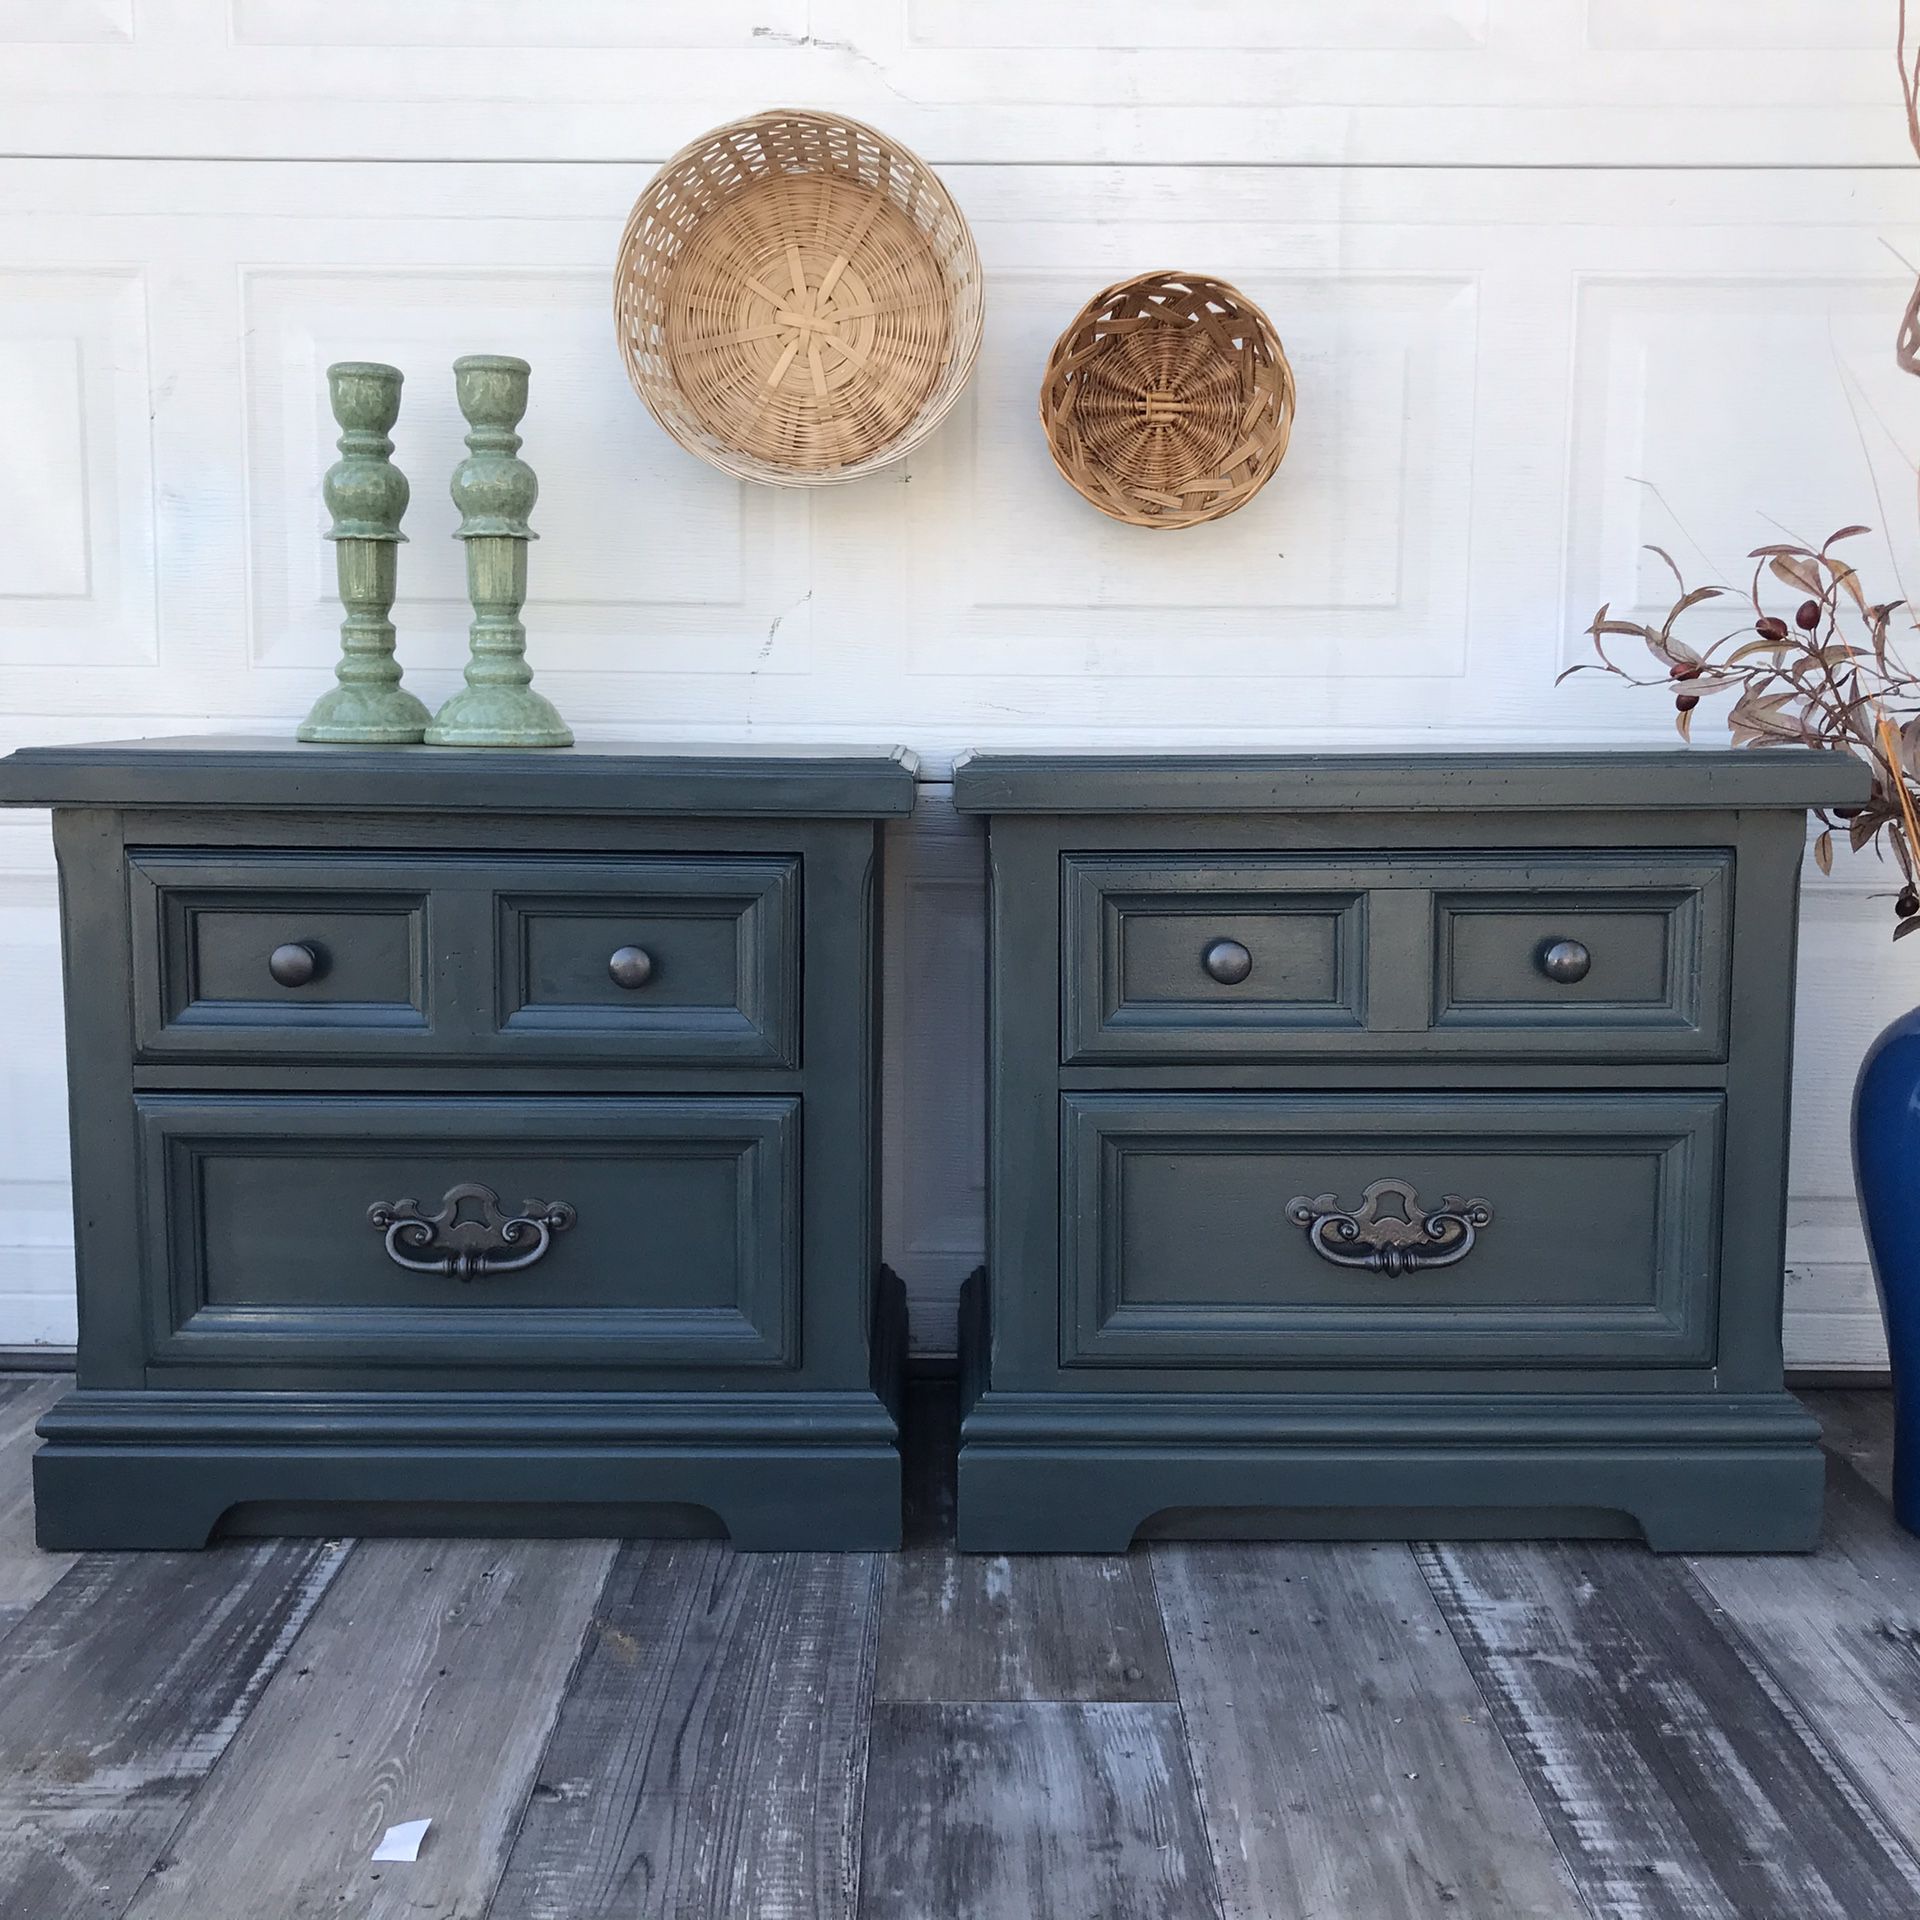 Antique solid wood teal green blue end table night stand set cabinet dresser